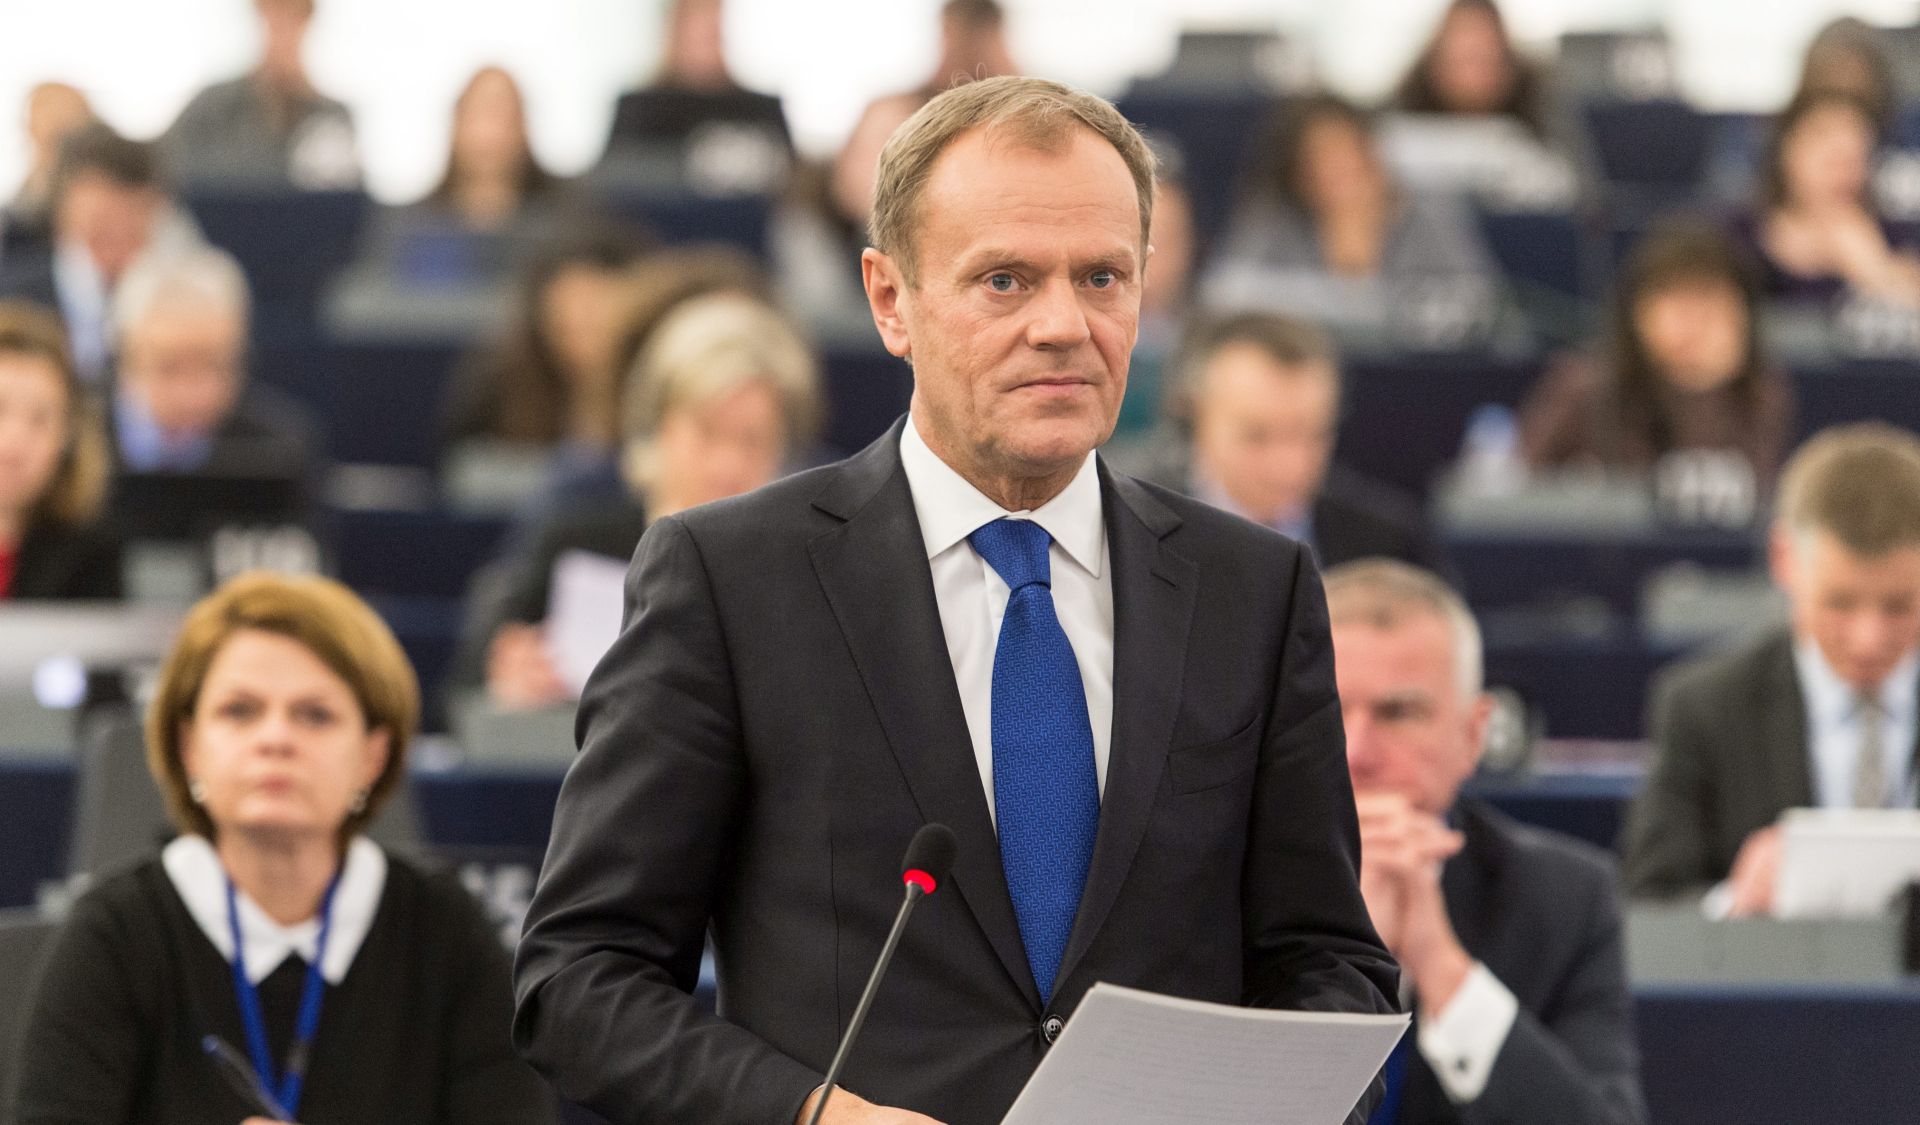 epa05111270 The President of the European Council, Donald Tusk, delivers his speech in the debate about the Conclusions of the European Council meeting of 17 and 18 December 2015, at the European Parliament in Strasbourg, France, 19 January 2016.  EPA/PATRICK SEEGER